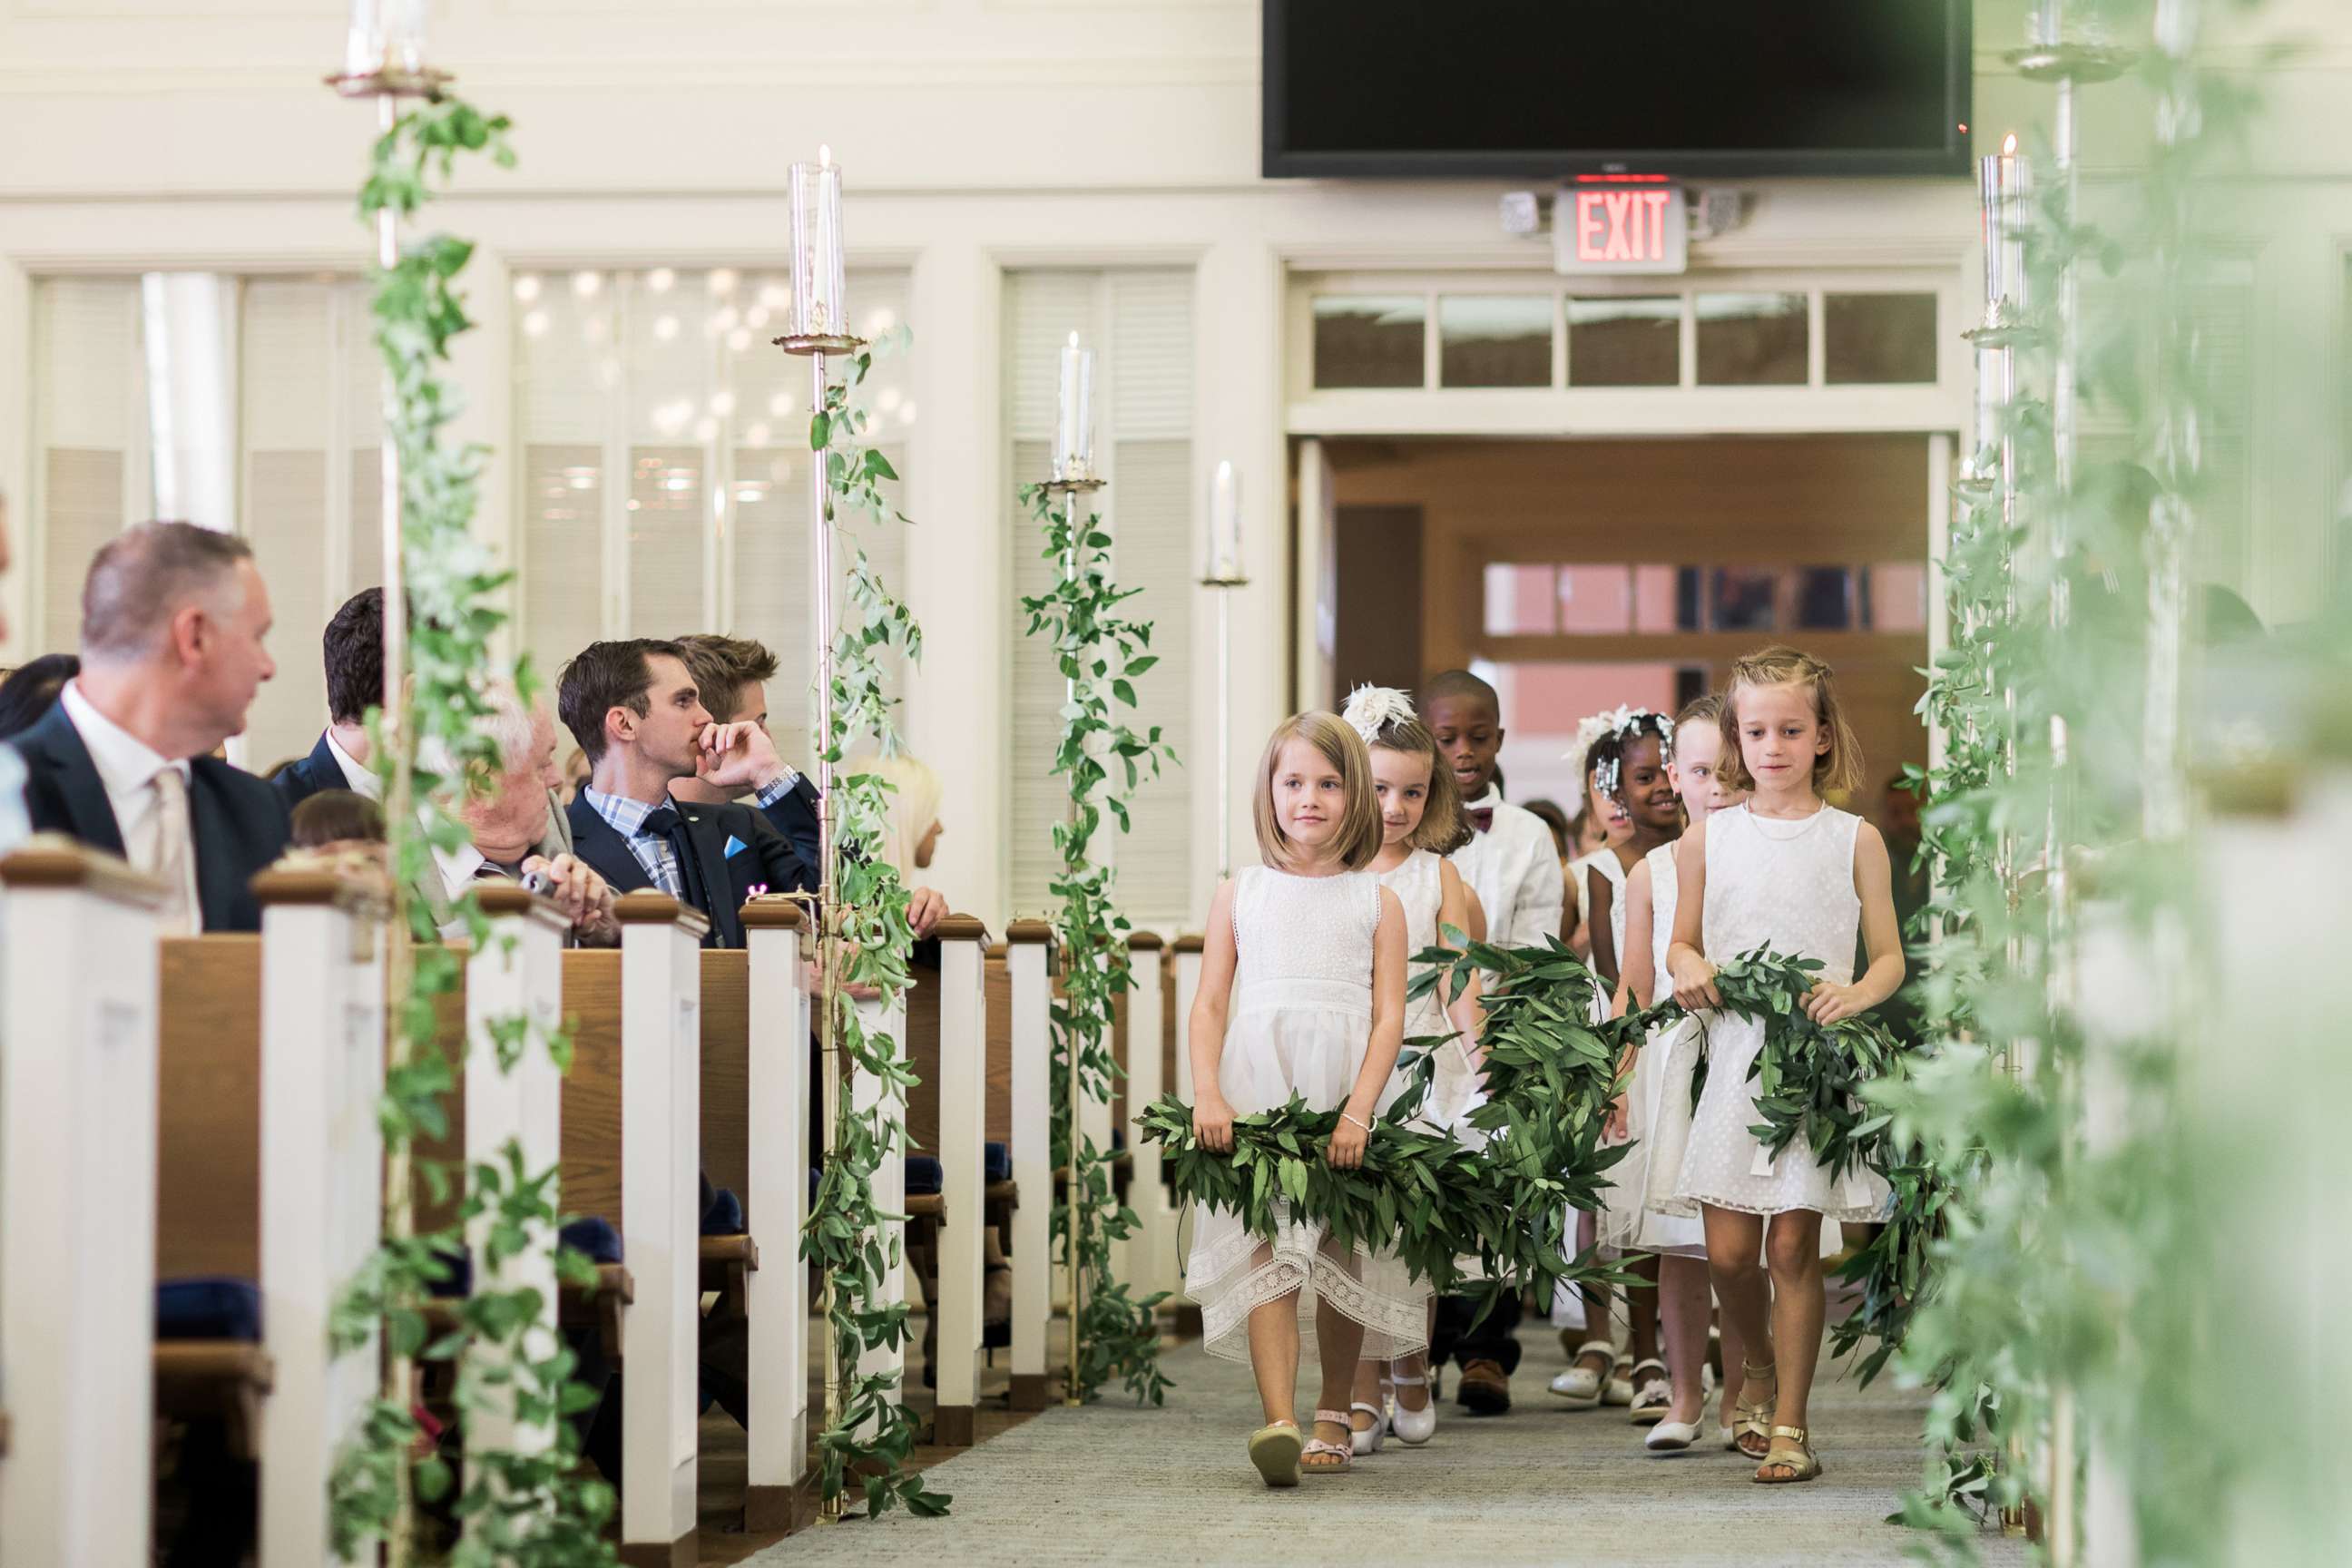 PHOTO: Indianapolis teacher Marielle Slagel Keller asked her students to be her flower girls and ring bearers in her June 24 wedding.